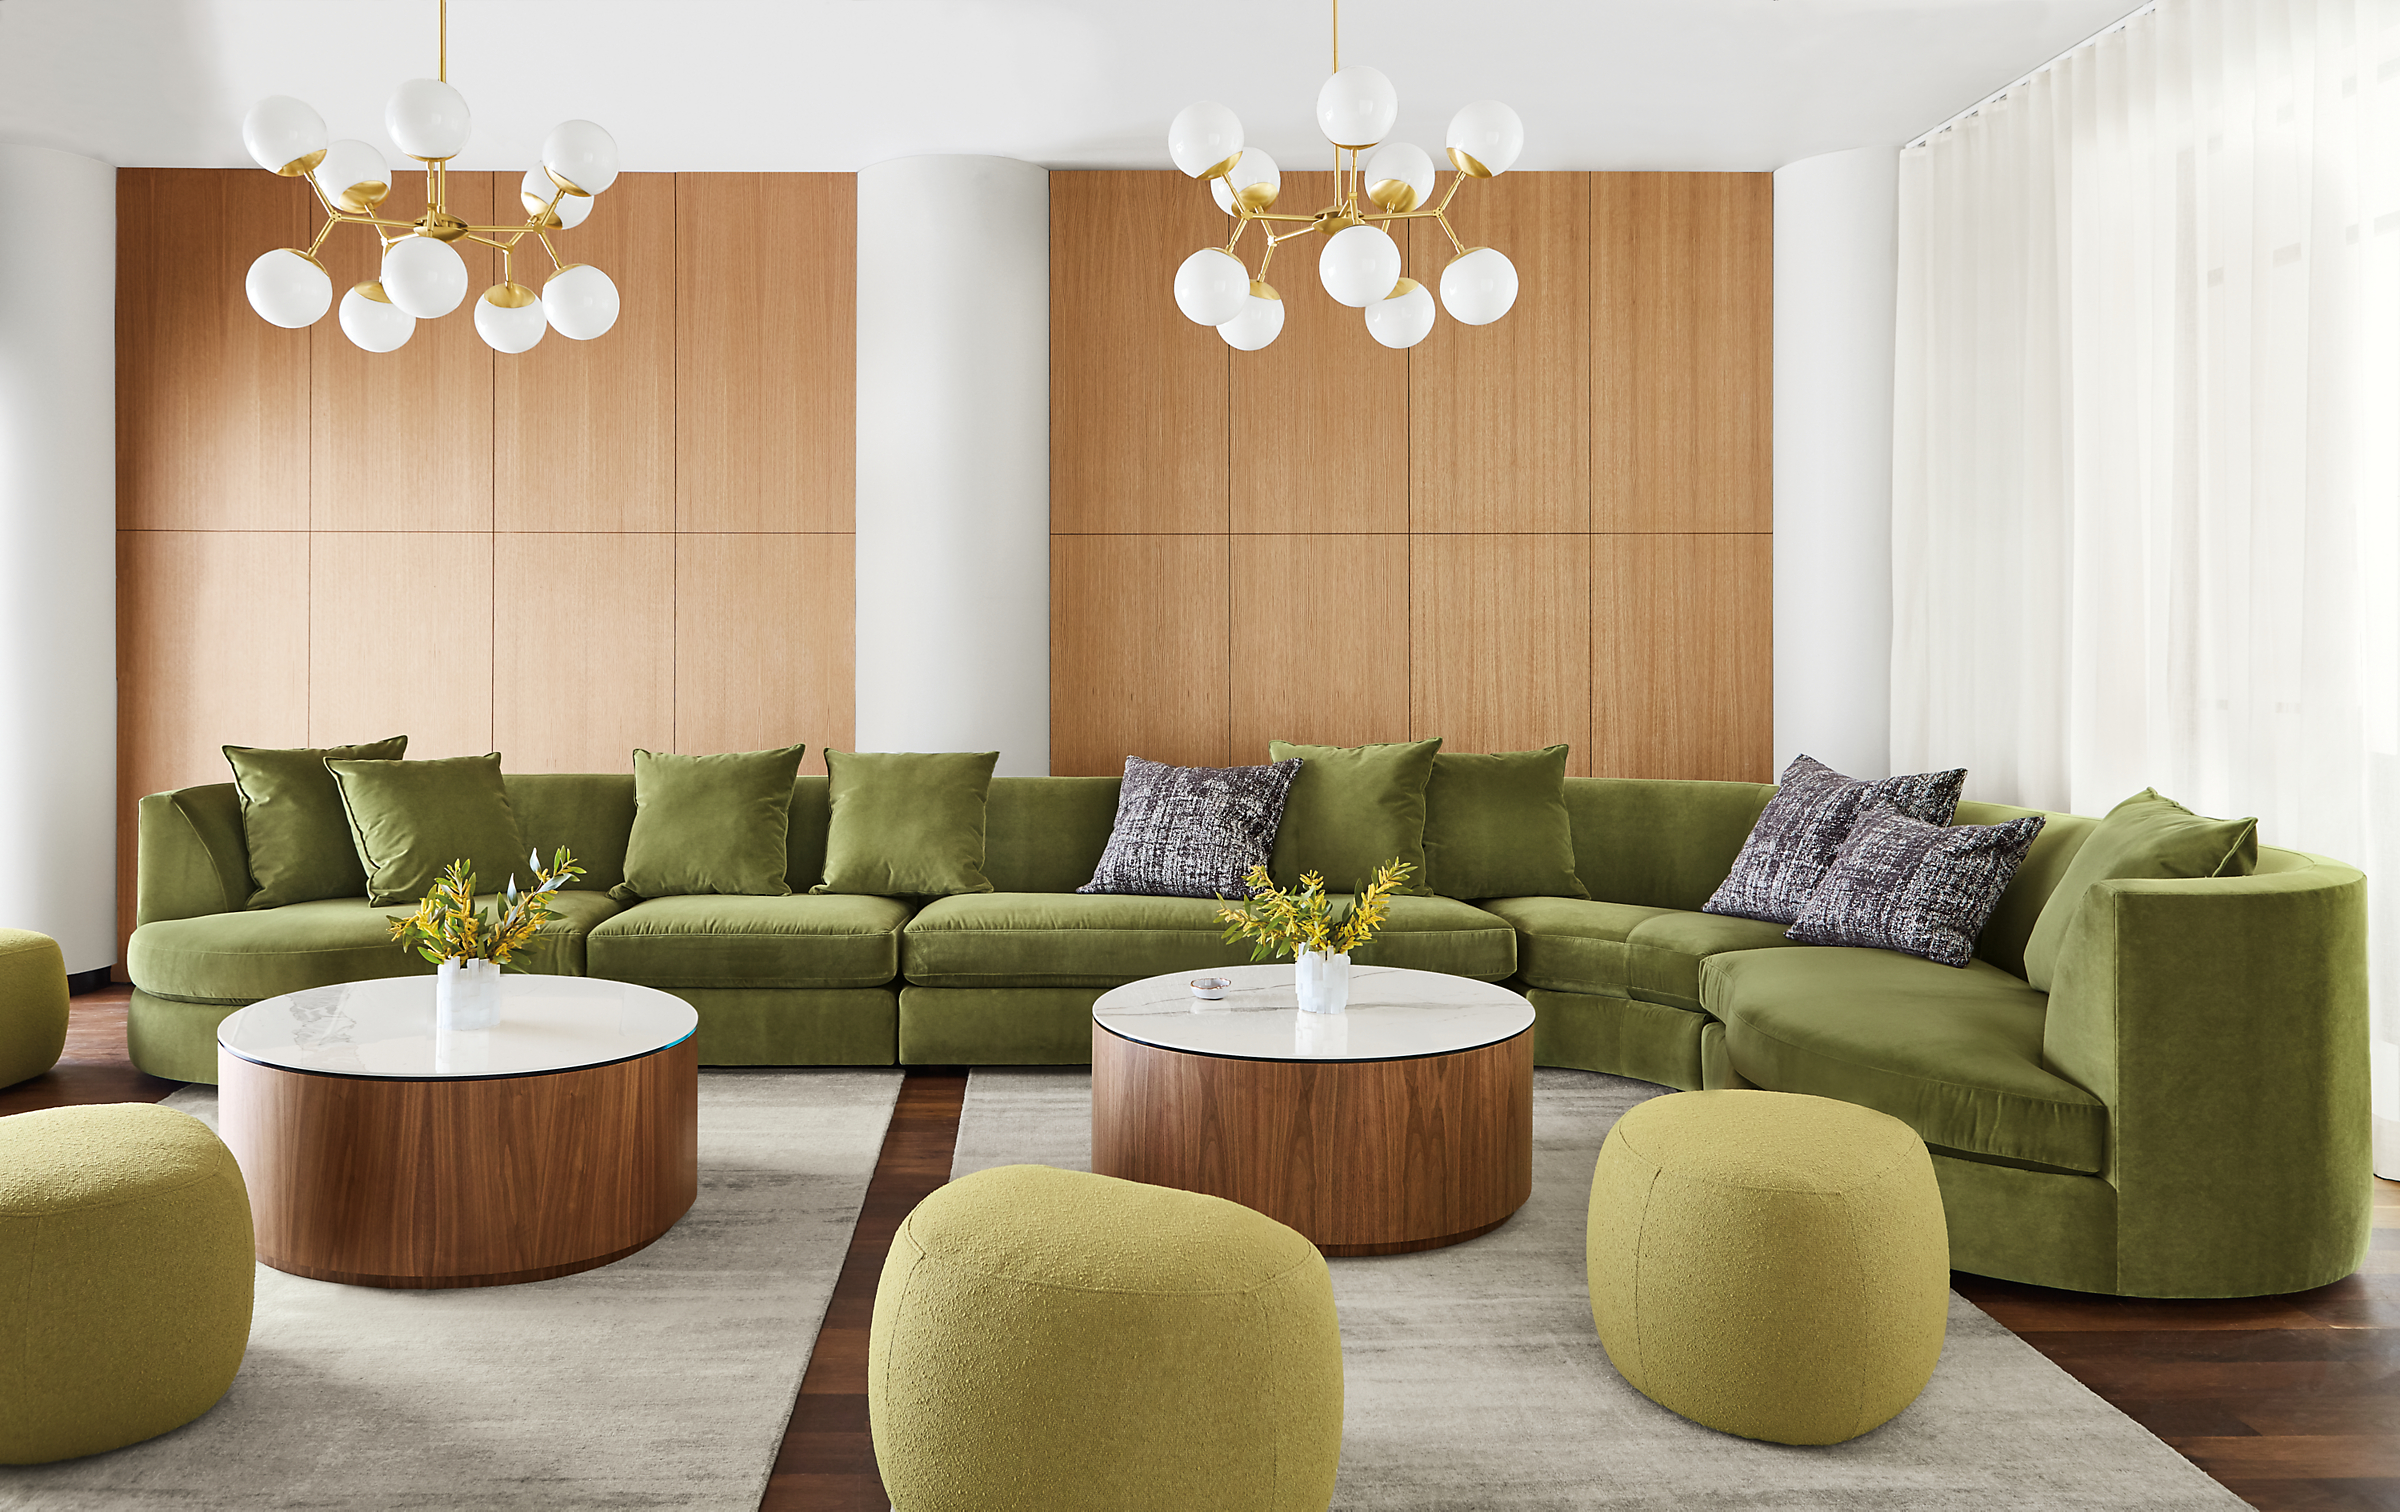 Astaire sectional configuration in Banks Moss with Liam coffee tables and Asher ottomans in declan moss.